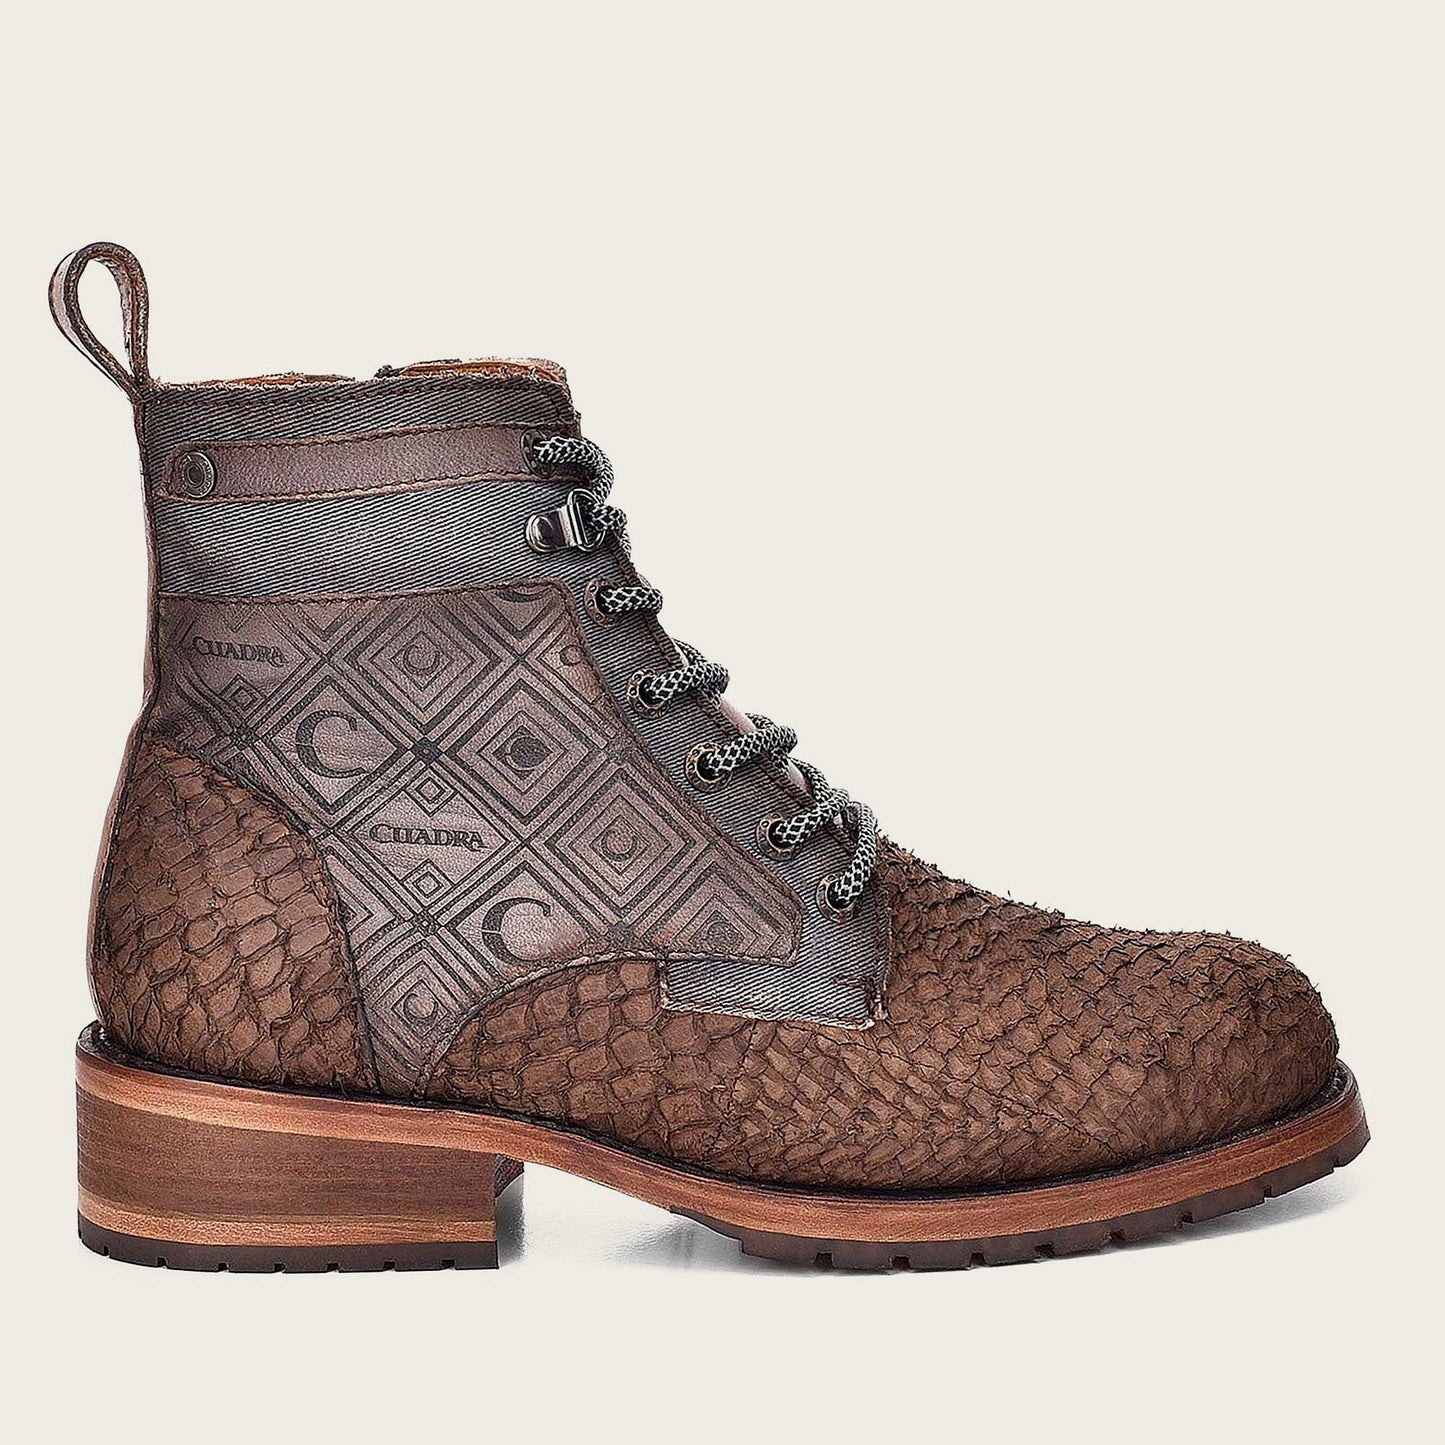 Stylish brown poisson leather boot for men, featuring engraved details for a unique touch.